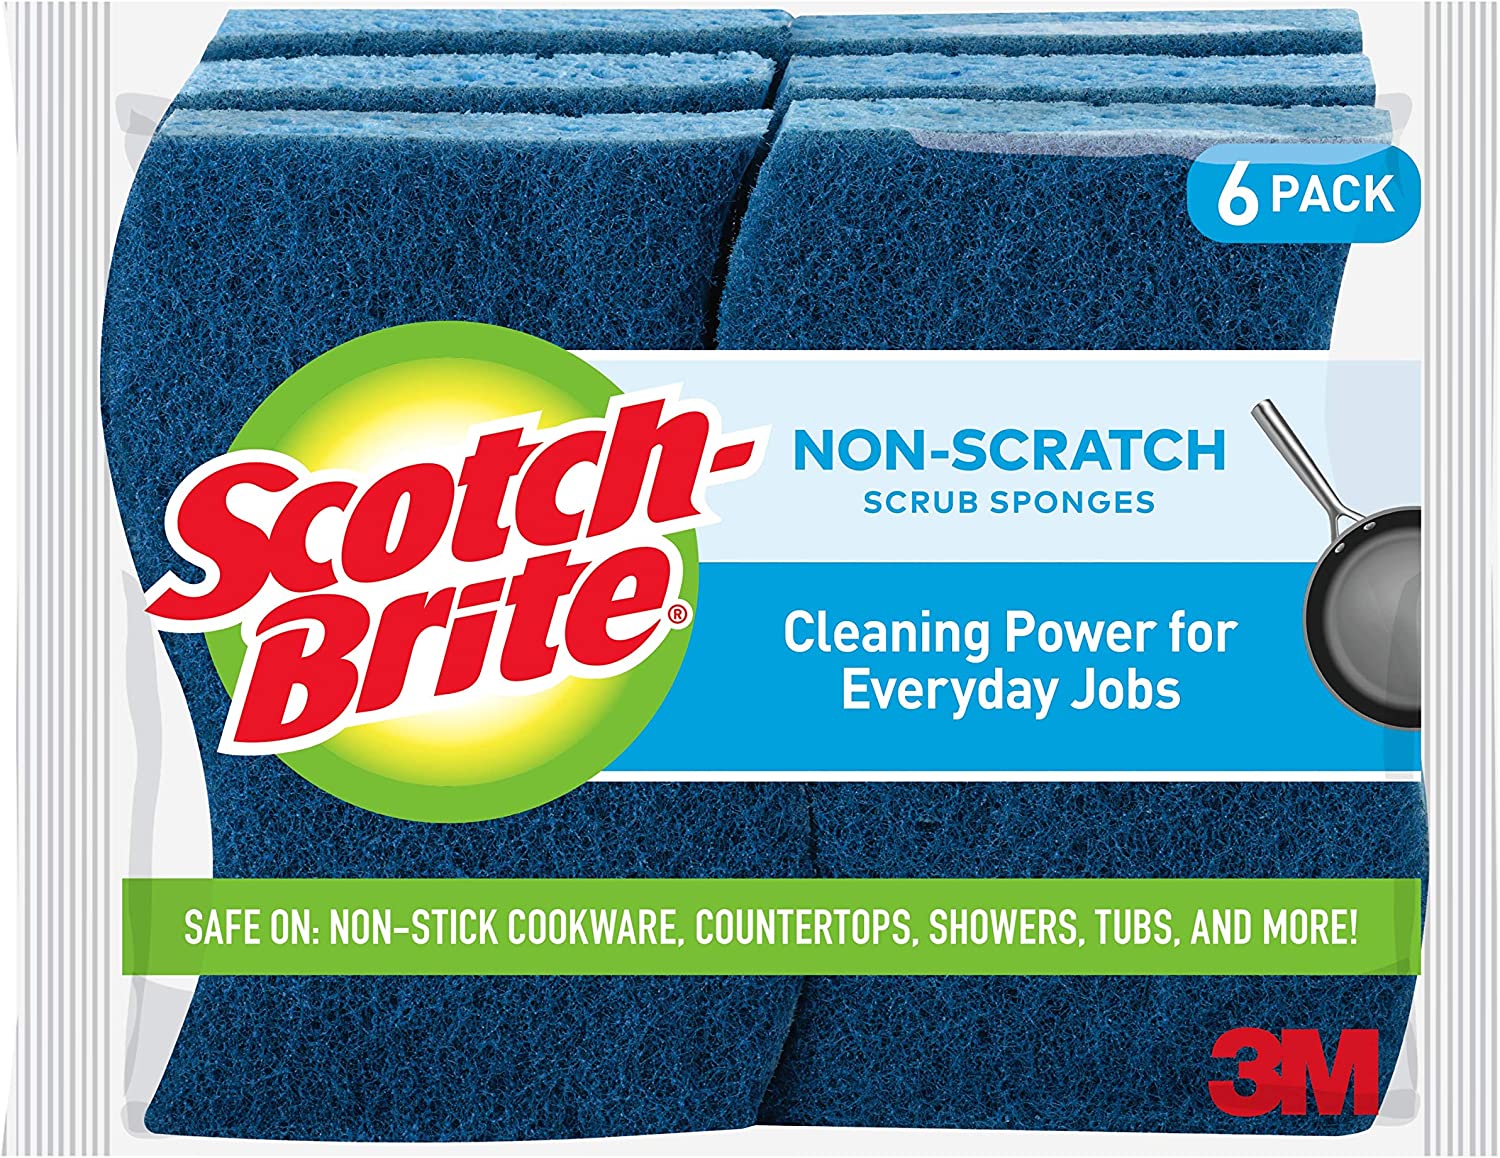 Scotch-Brite Non-Stick Cookware Cleaning Sponges, 6-Pack